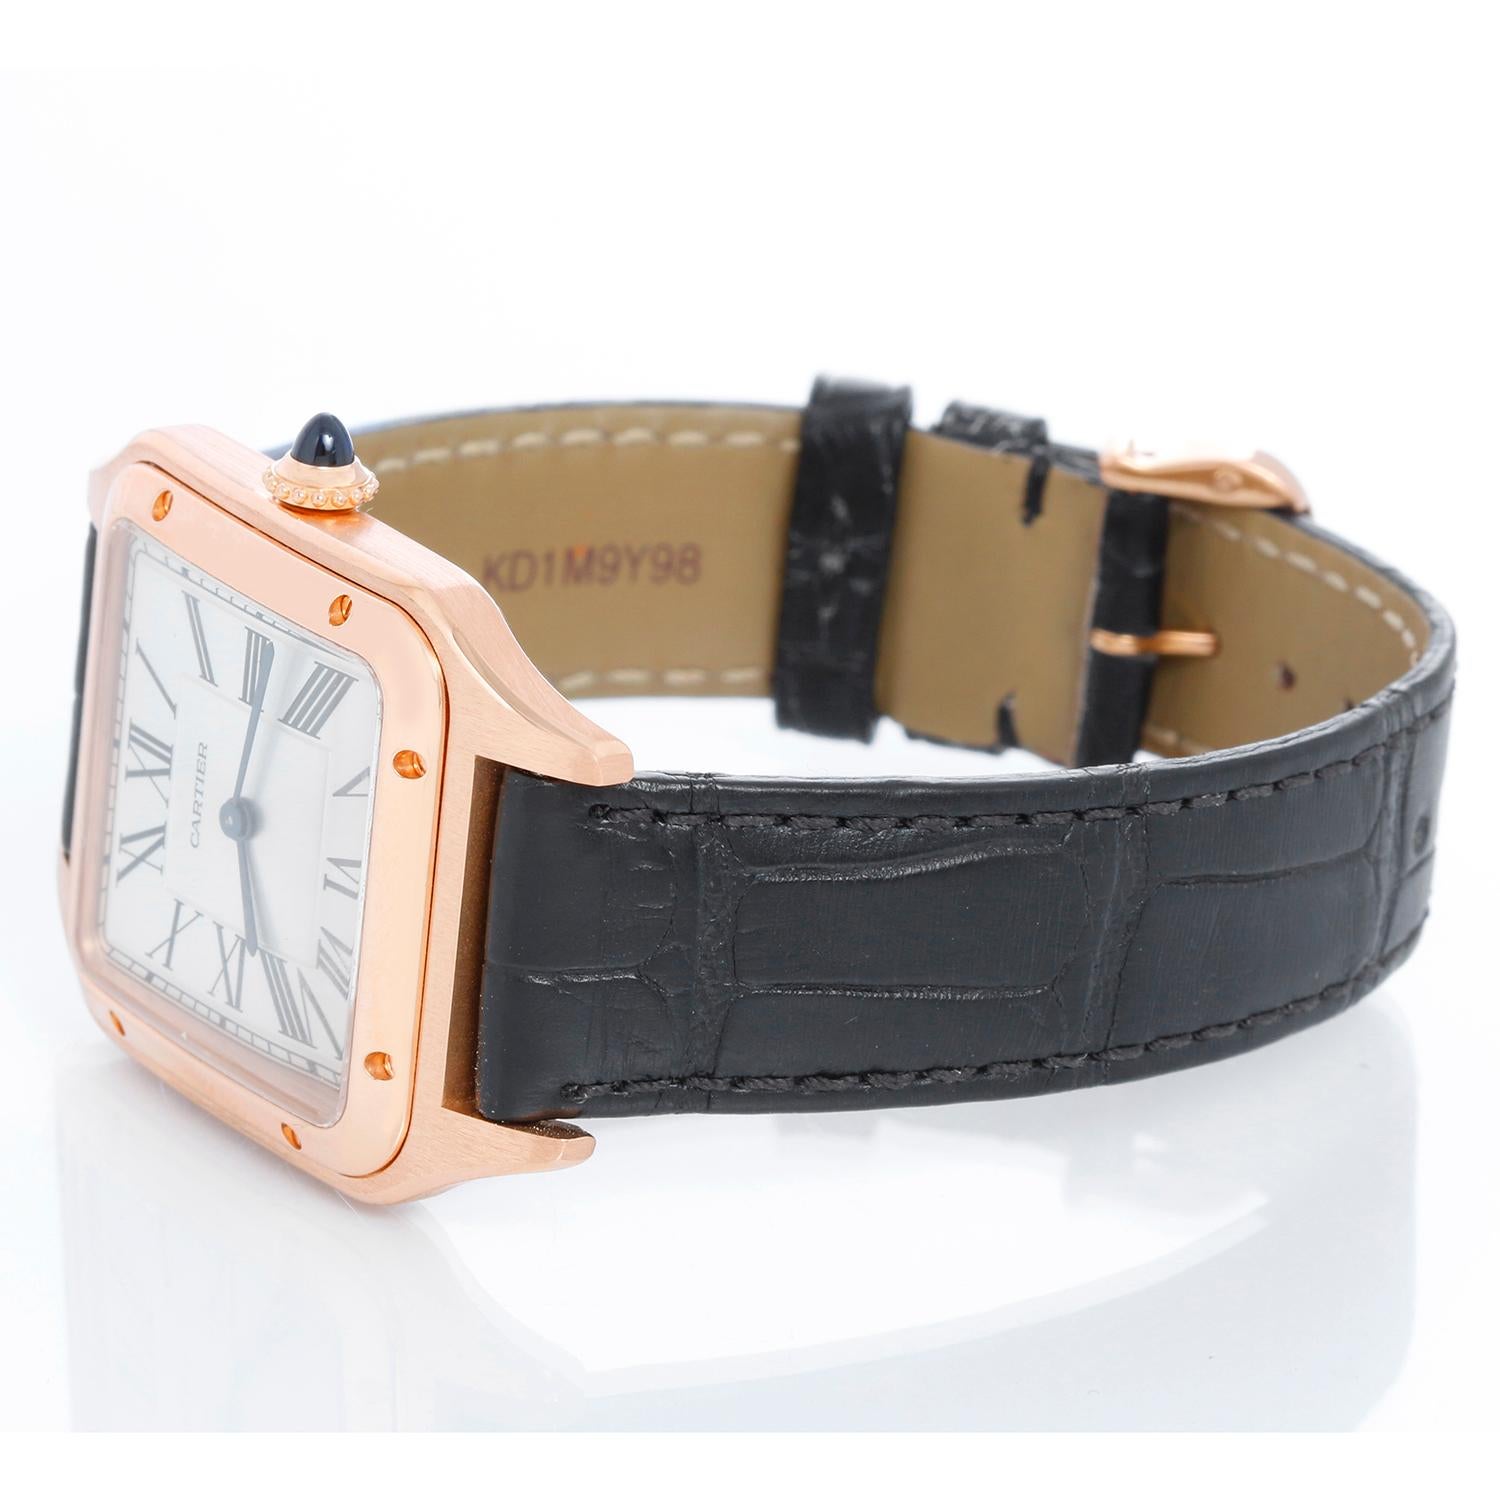 Cartier Santos Dumont Quartz 18k Rose  Gold WGSA0021 4227 - Quartz. 18k rose gold square case (31 mm x 42 mm) diameter. Silver Dial with Roman numerals. Black Cartier alligator strap with 18k rose gold tang buckle . Pre-owned with Cartier box and